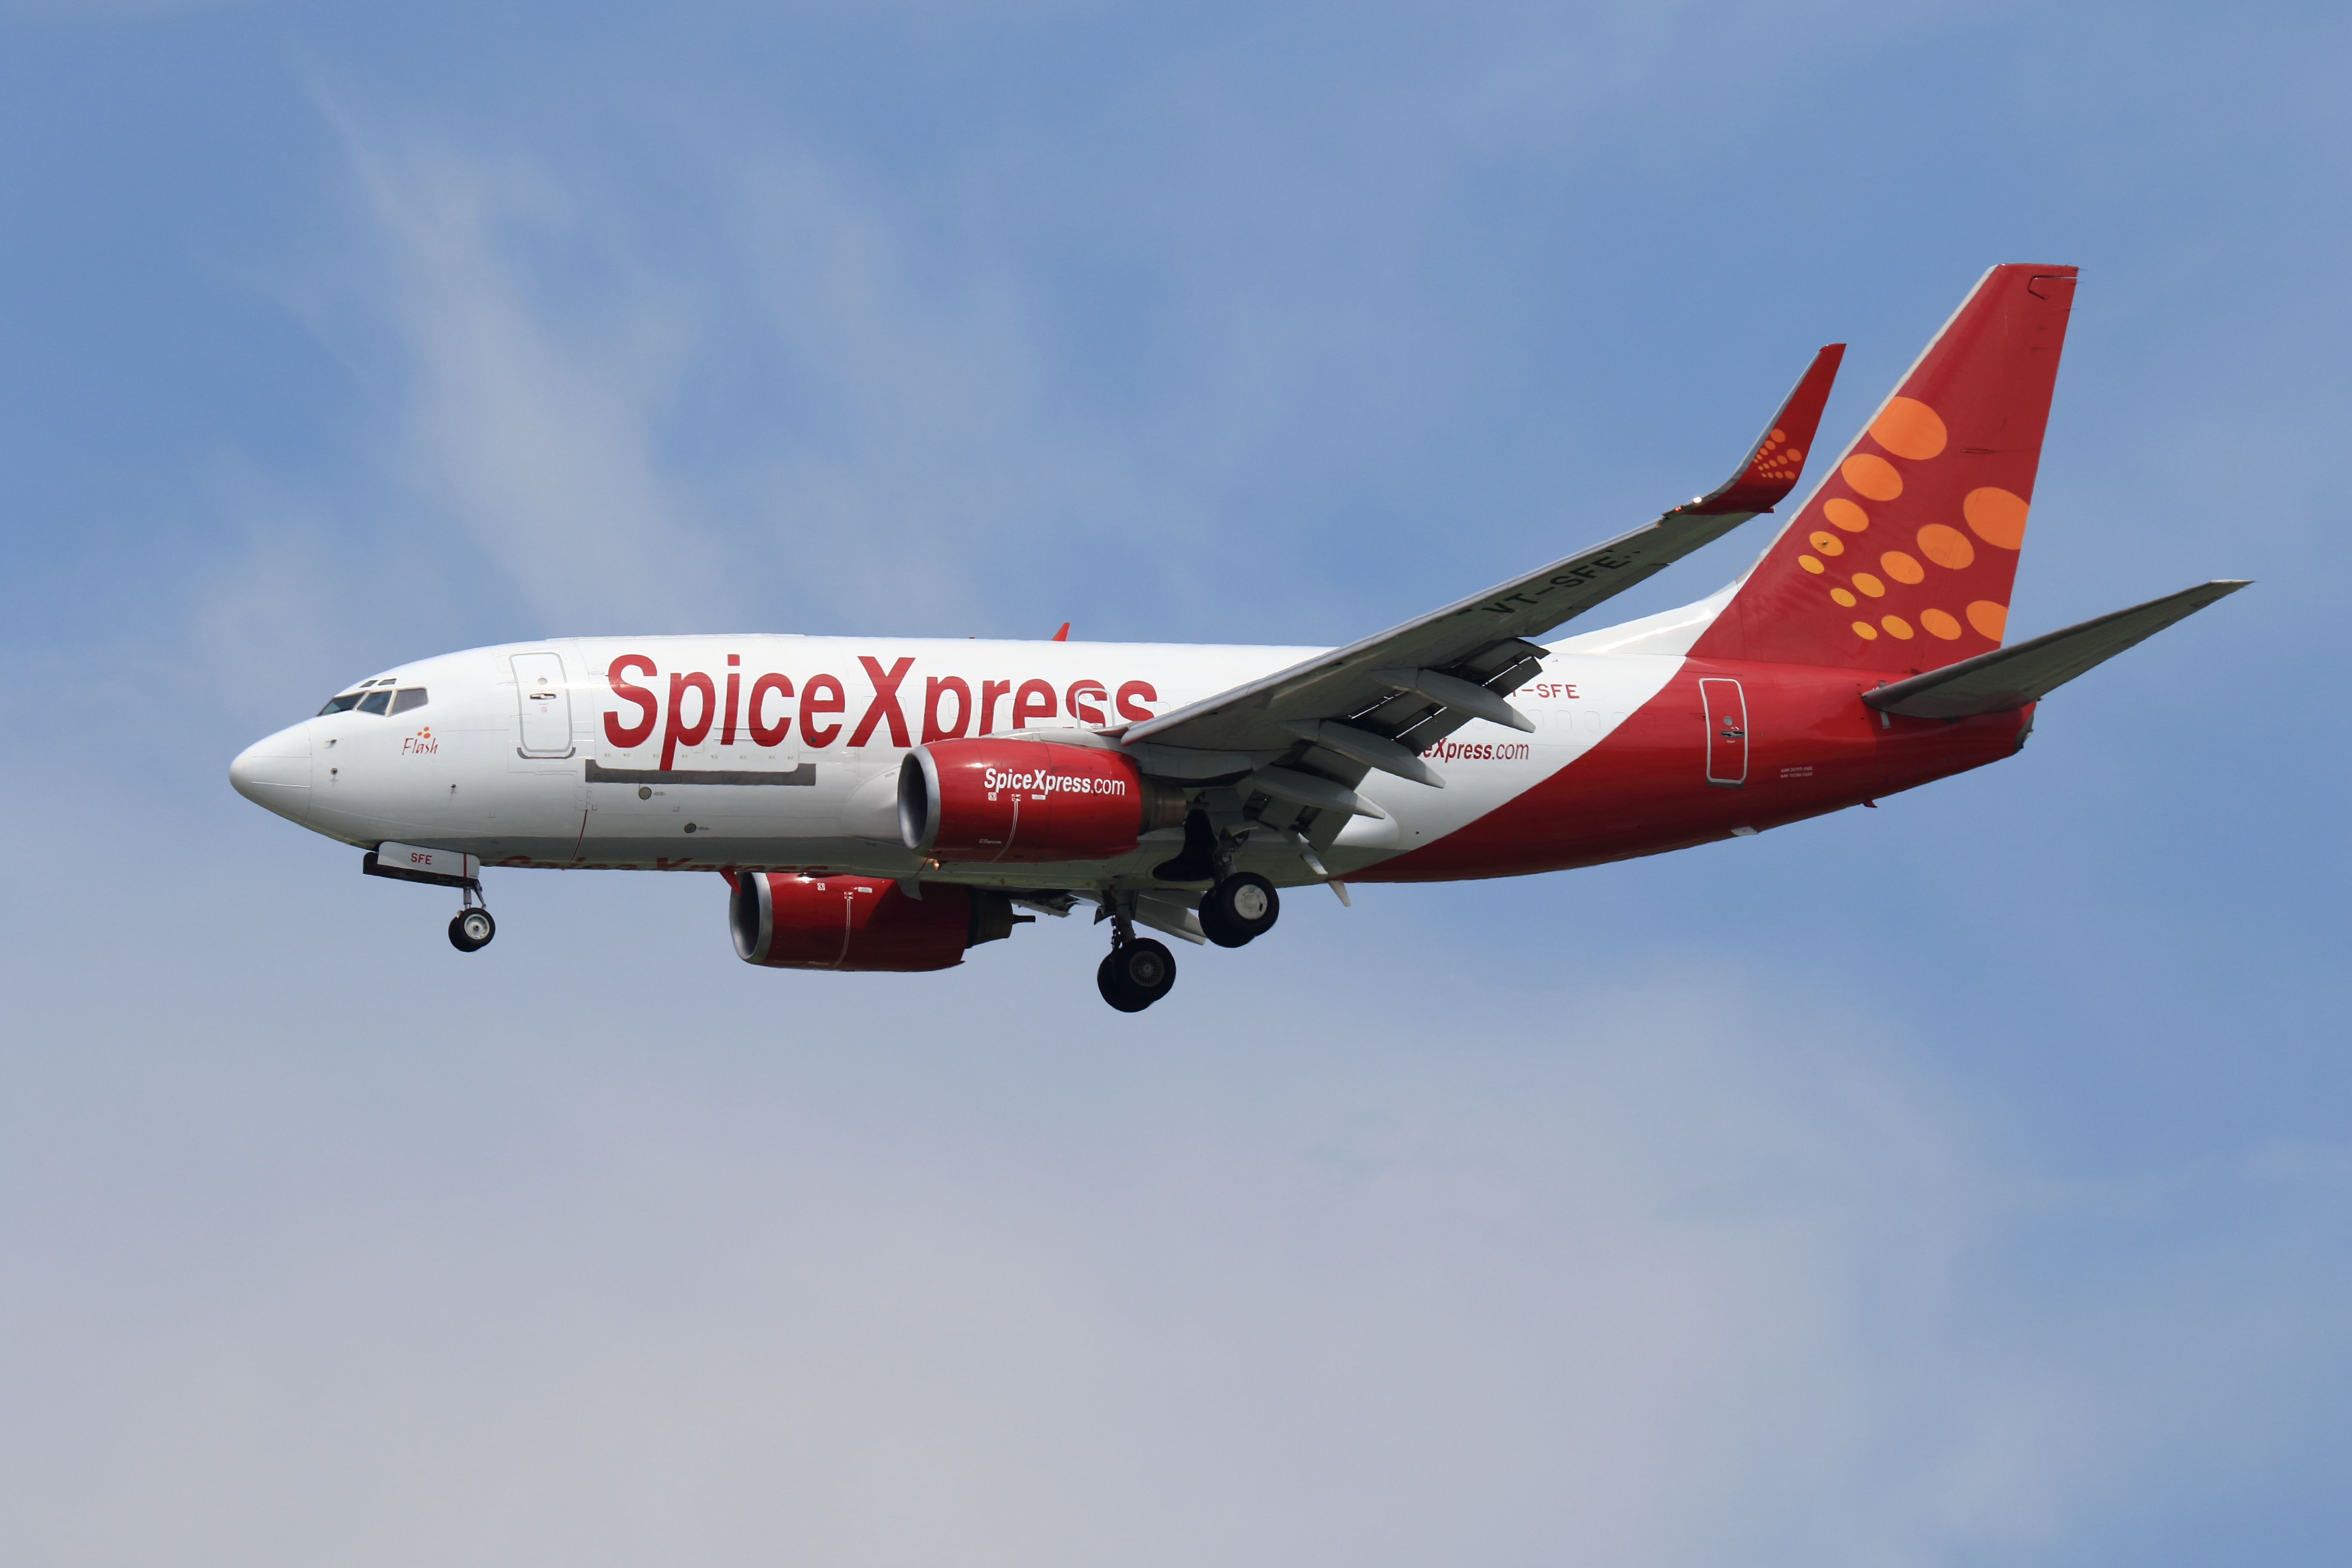 A SpiceXpress Boeing 737 flying in the sky.